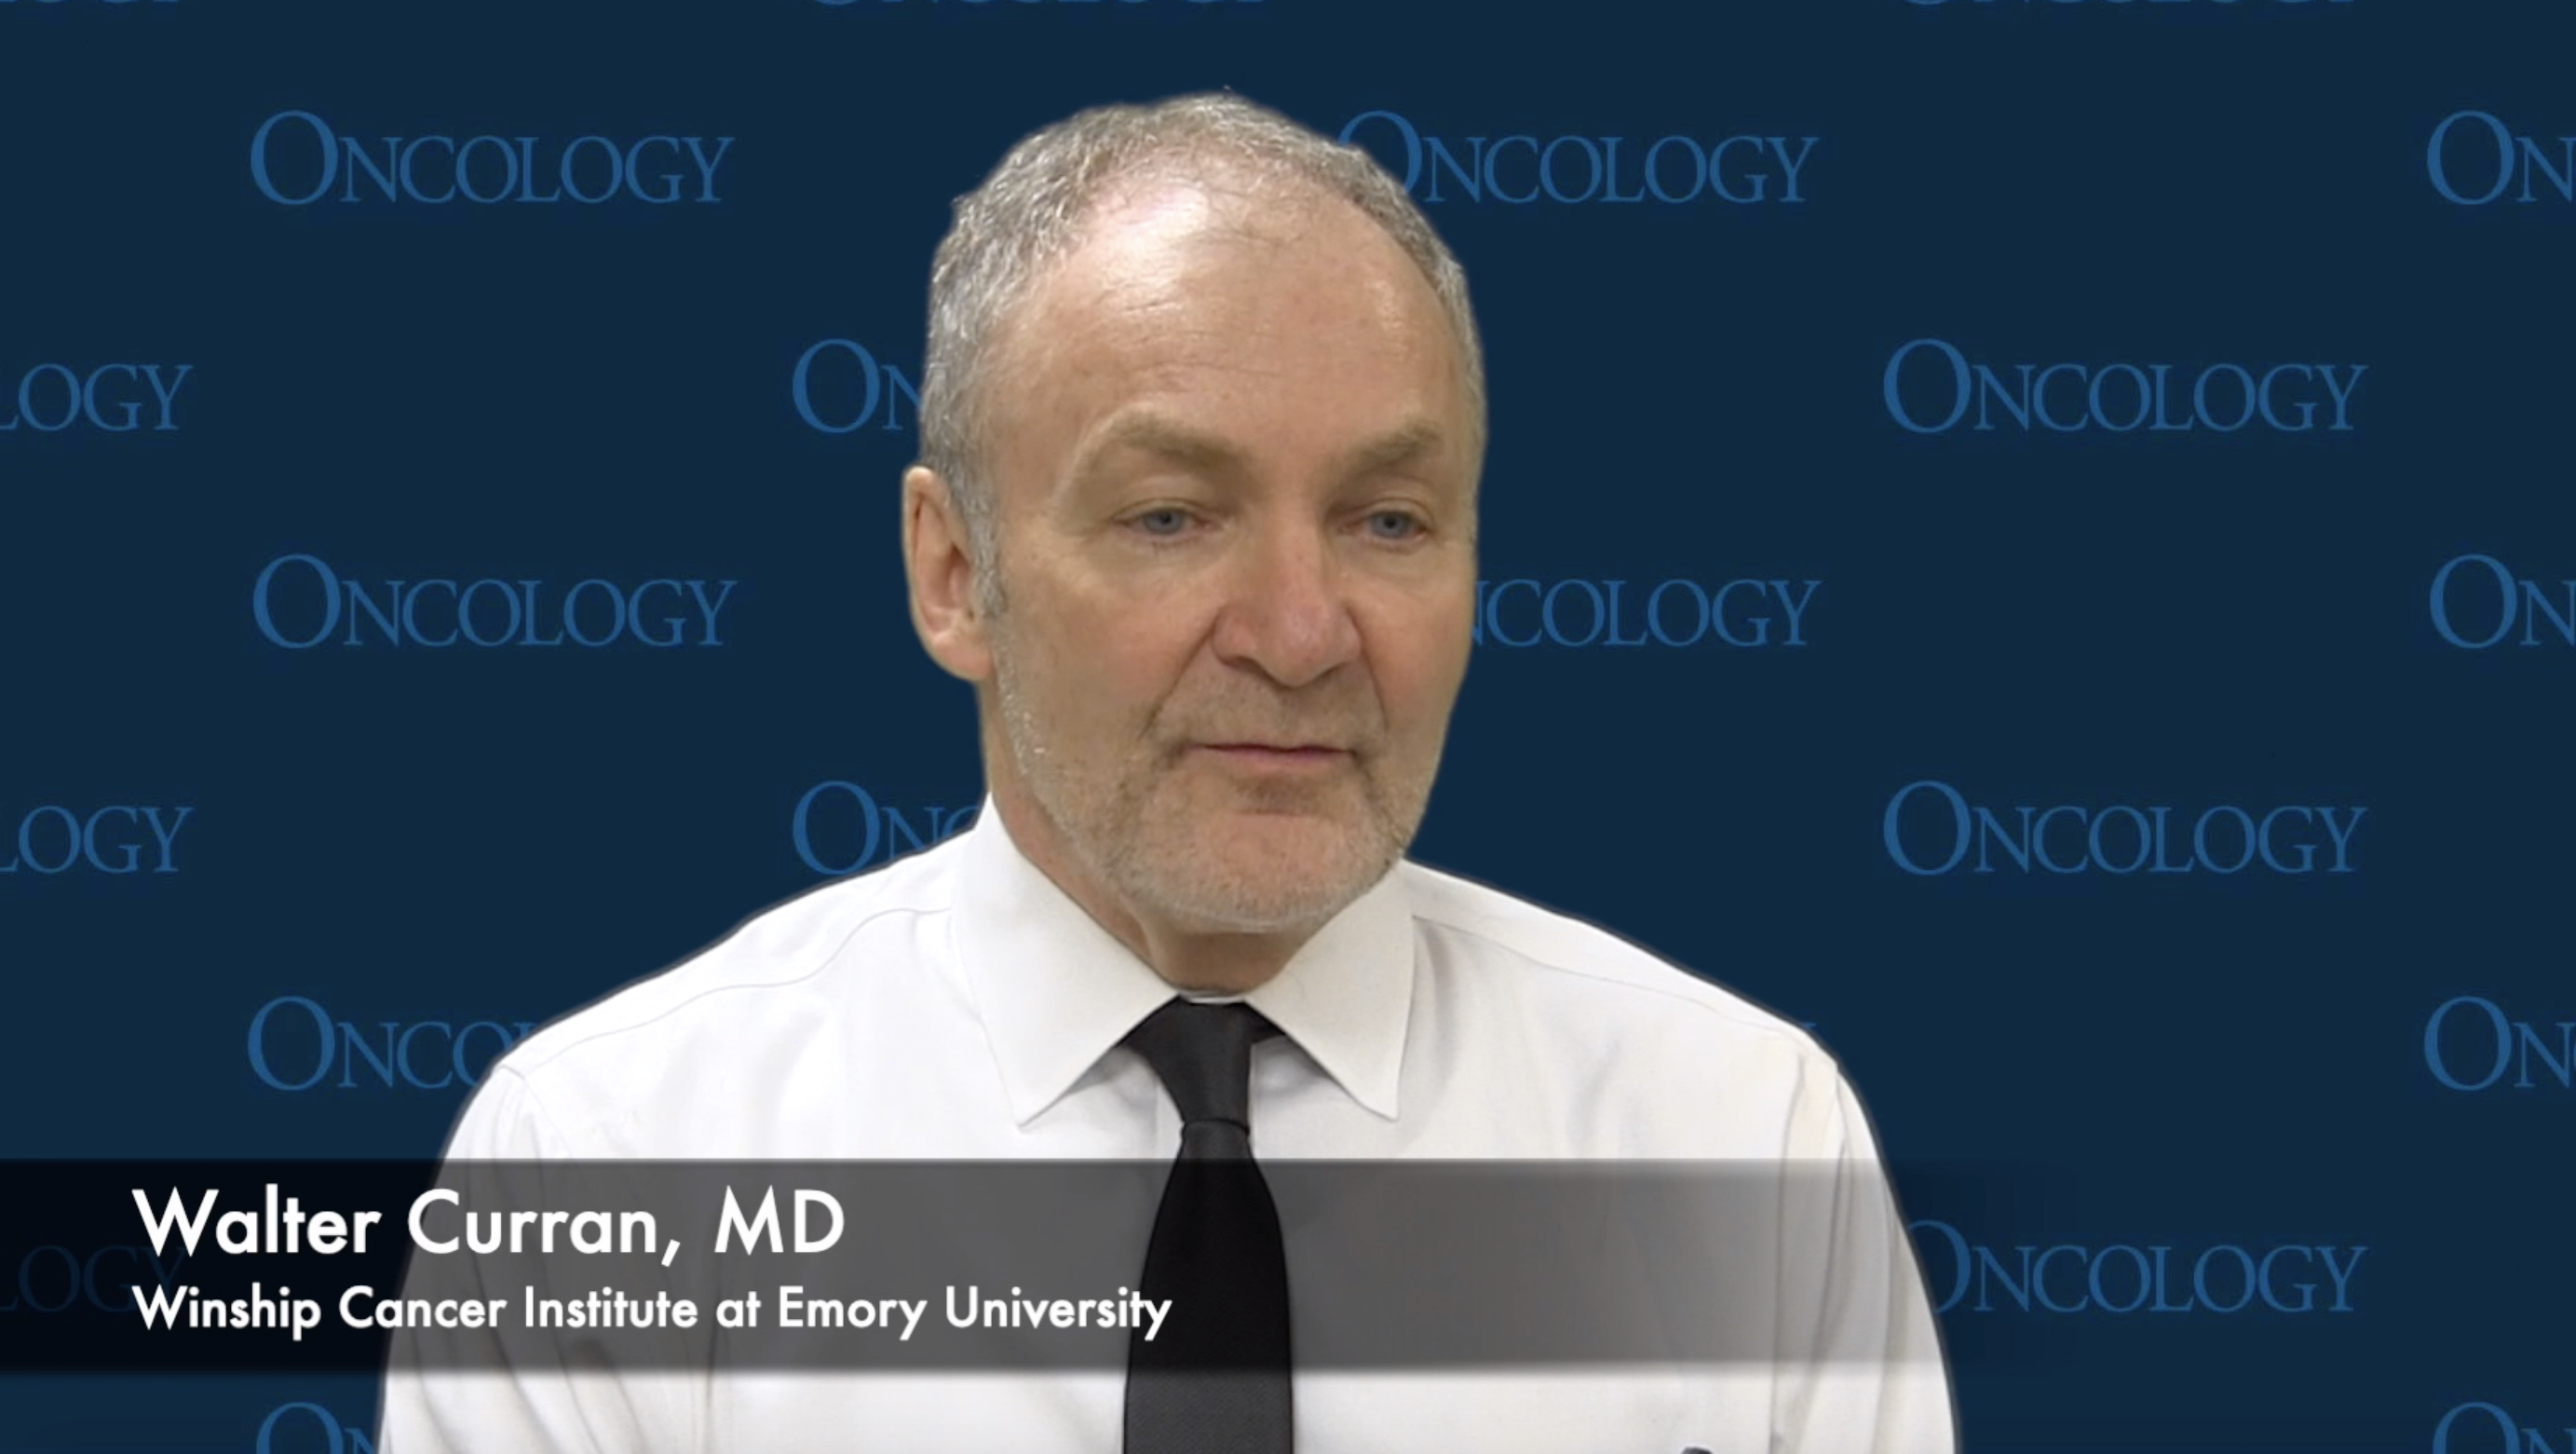 Walter Curran, MD, on Integration of Immunotherapy with Radiation Therapy